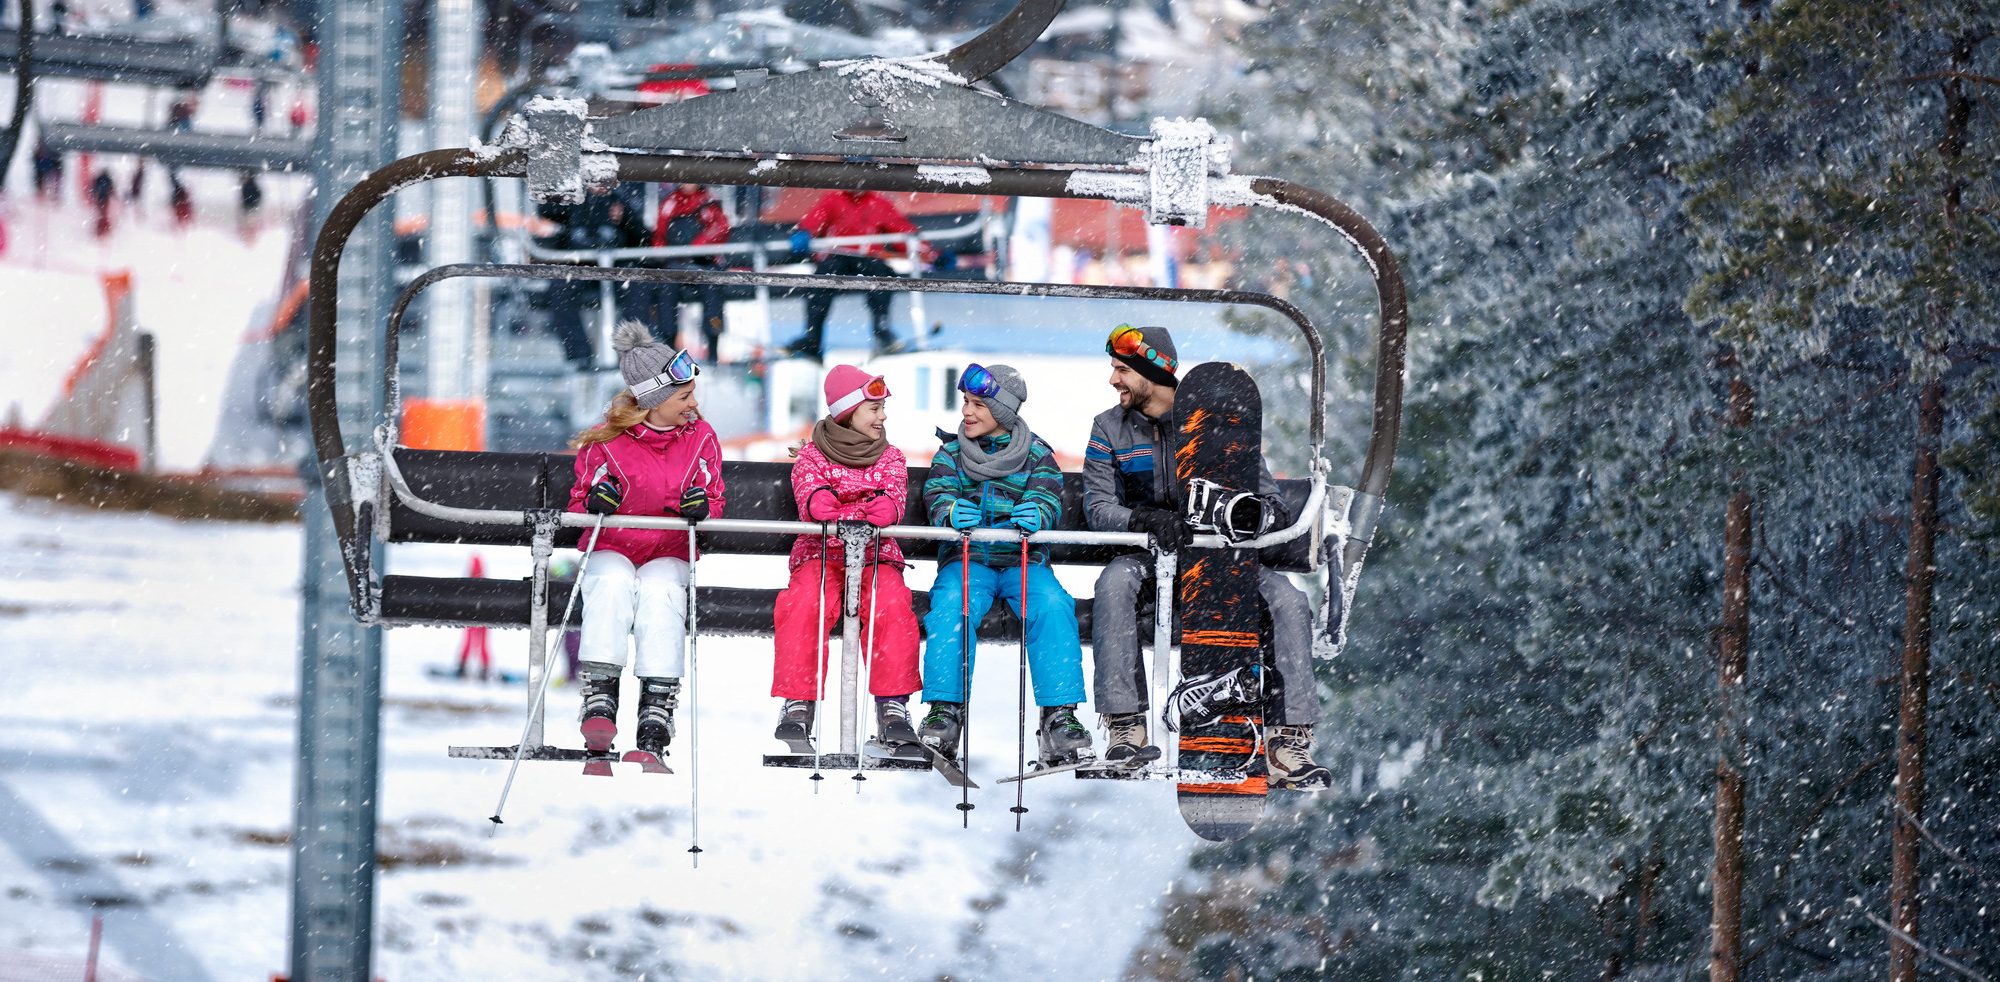 A family is enjoying its family ski trip in France, where their kids learn how to ski.